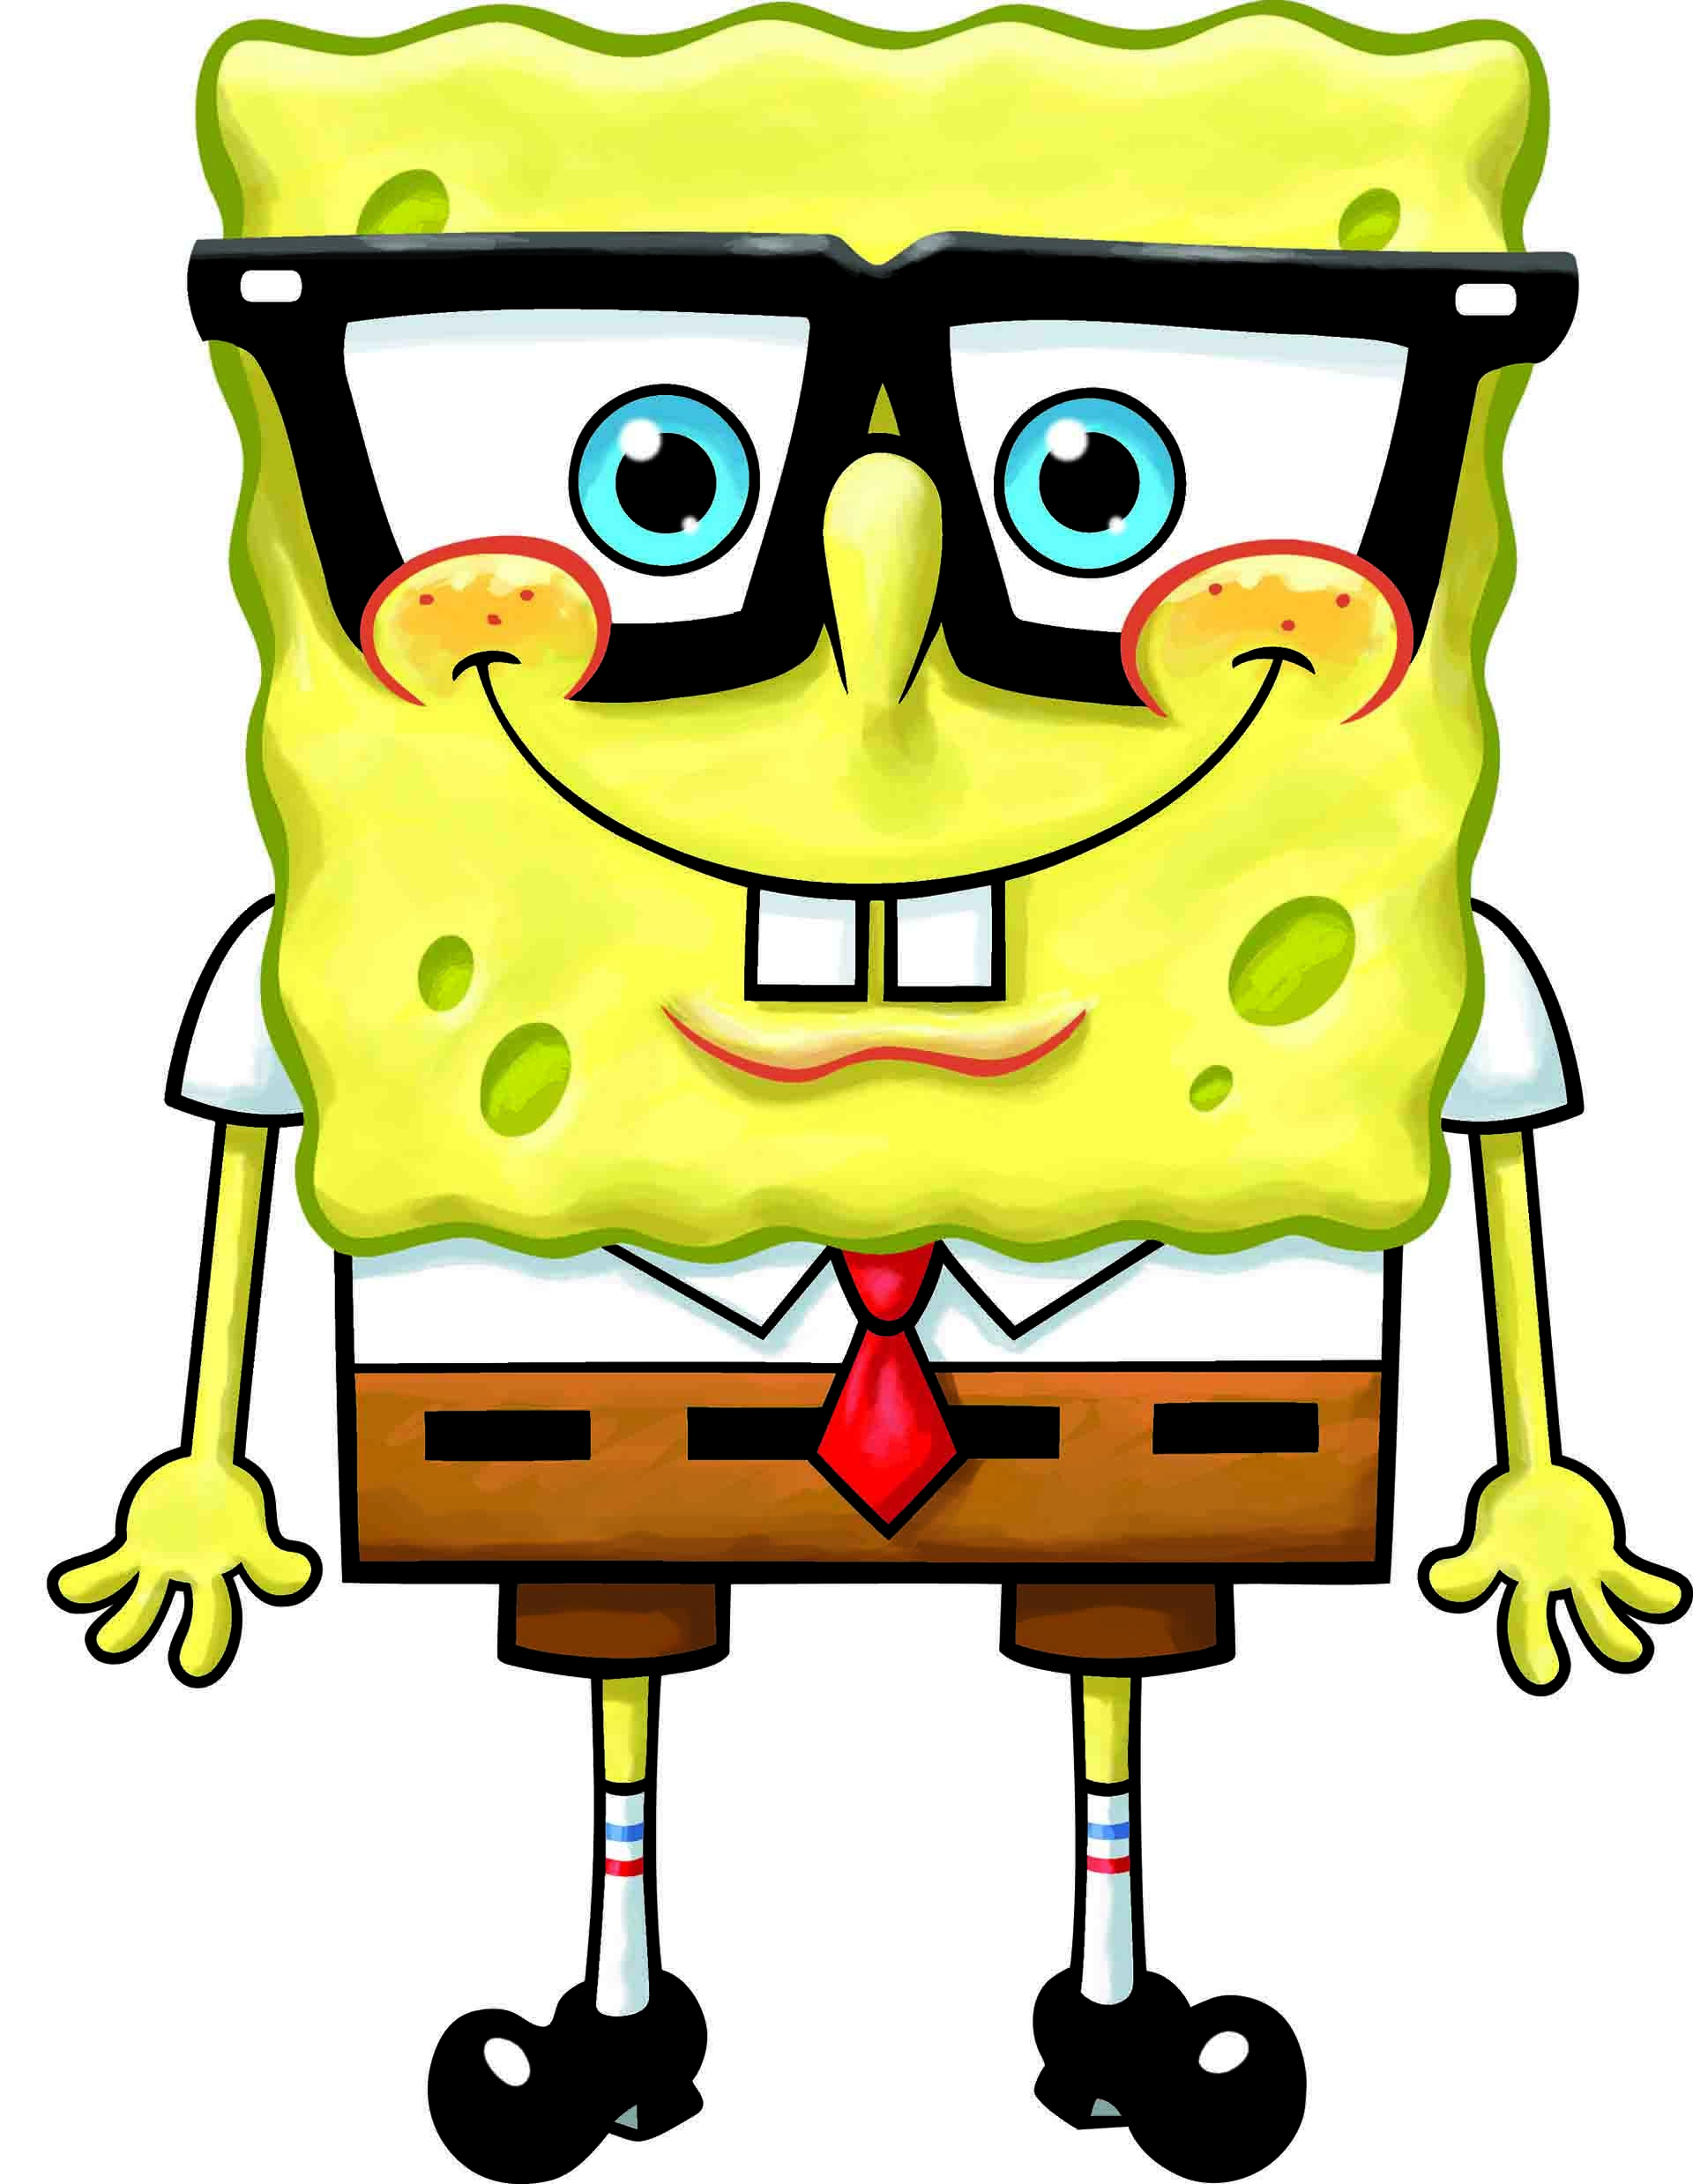 1920x2477 Preview Spongebob Squarepants Images by Amani Chisnell